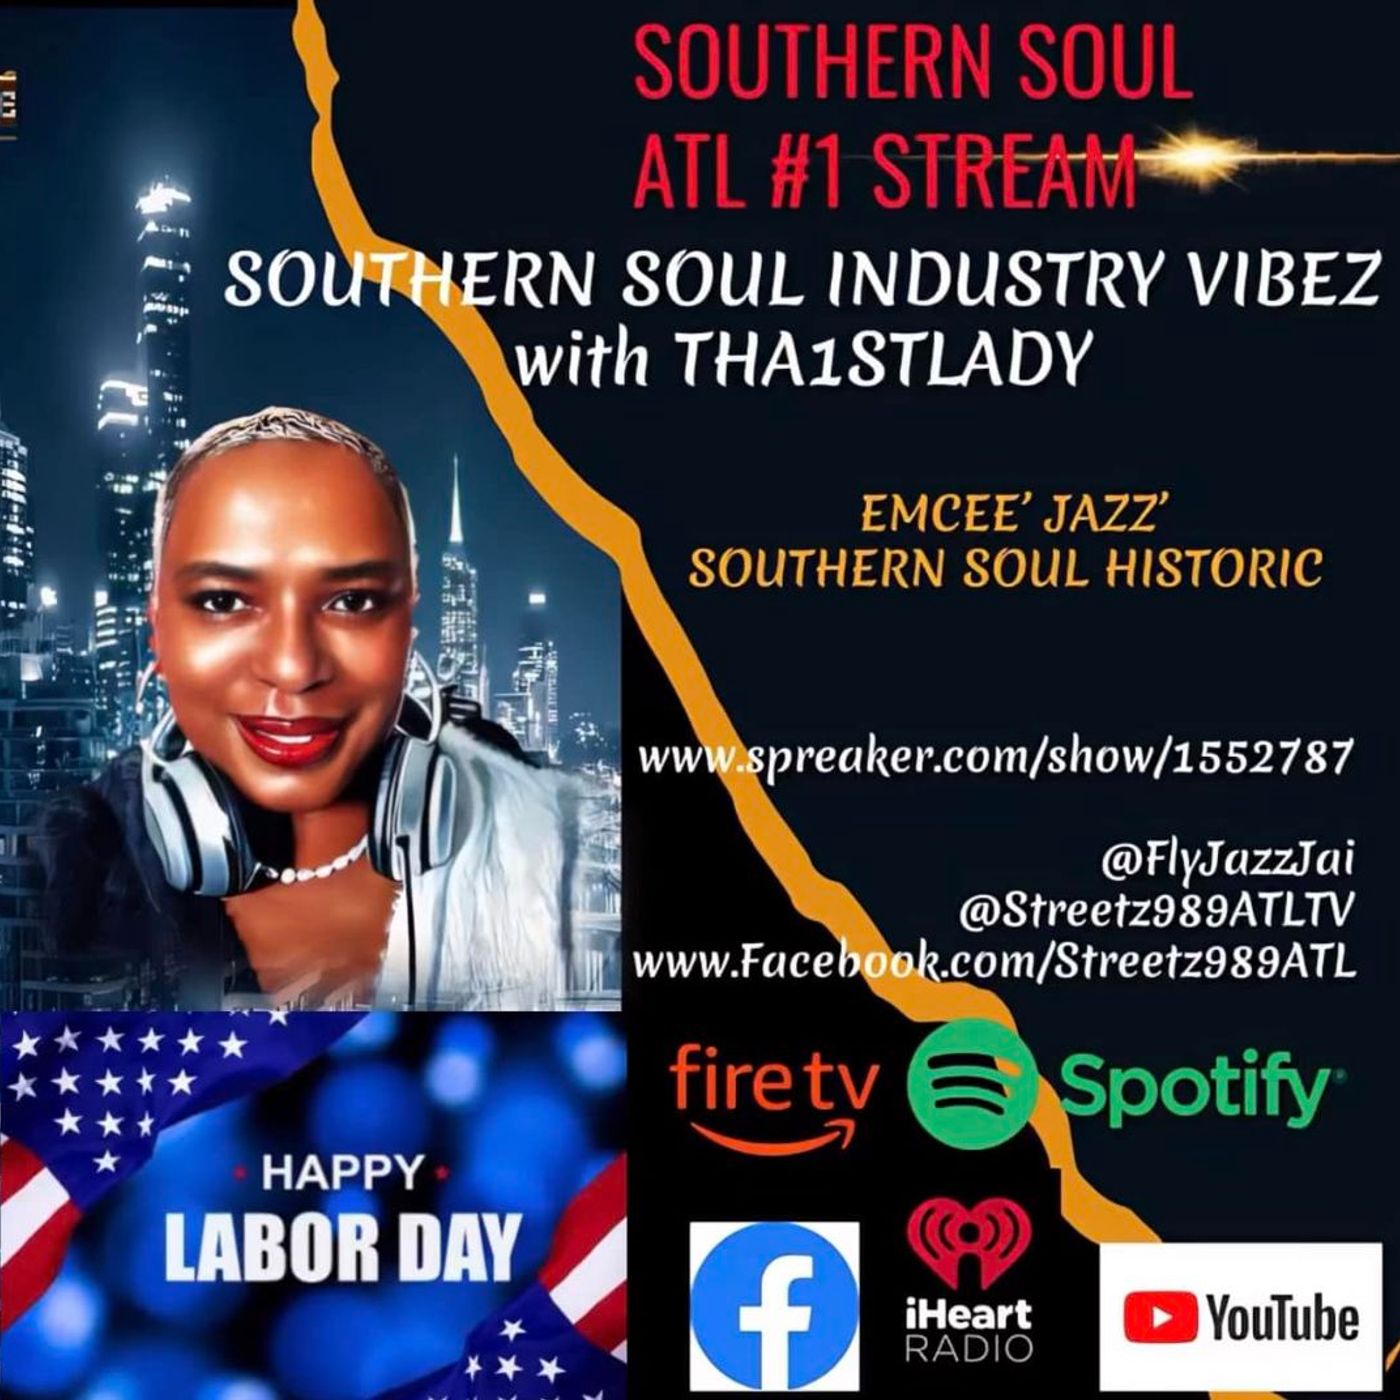 Southern Soul Industry Vibez "Labor Day Mixx" with EmCee' Jazz'